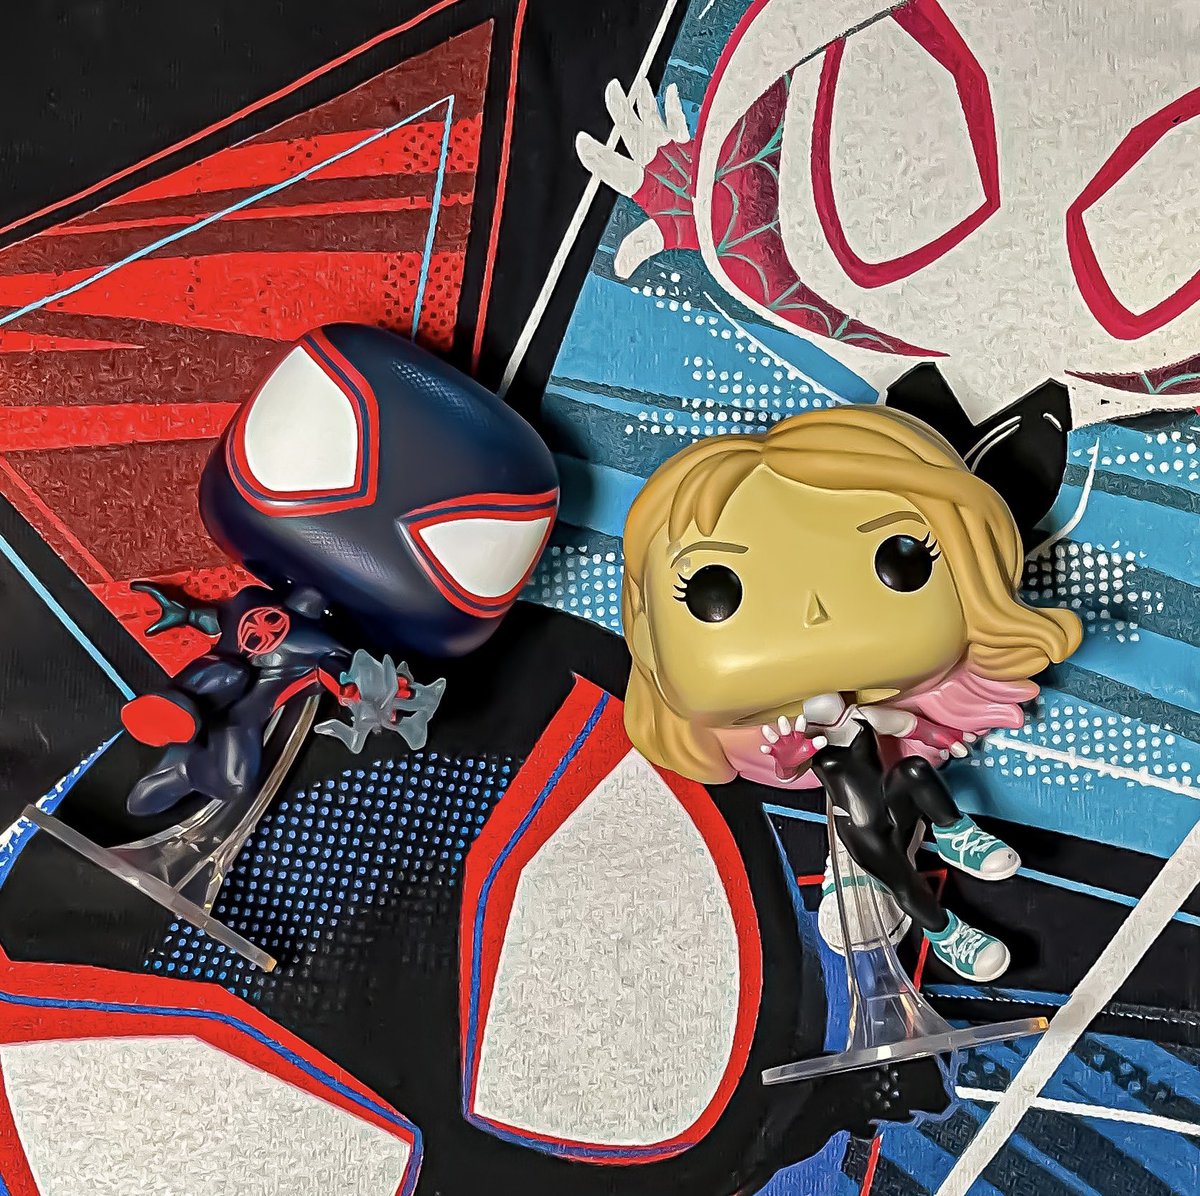 Traveling in style across the spider verse for this #funkofashionfriday can’t wait to see the movie!! This one’s going to be amazing I just know it! 

#FOTW | #funaticoftheweek 

👑 @OriginalFunko
🕸️ #MyFunkoStory 
📸 #FunkoPhotoADayChallenge